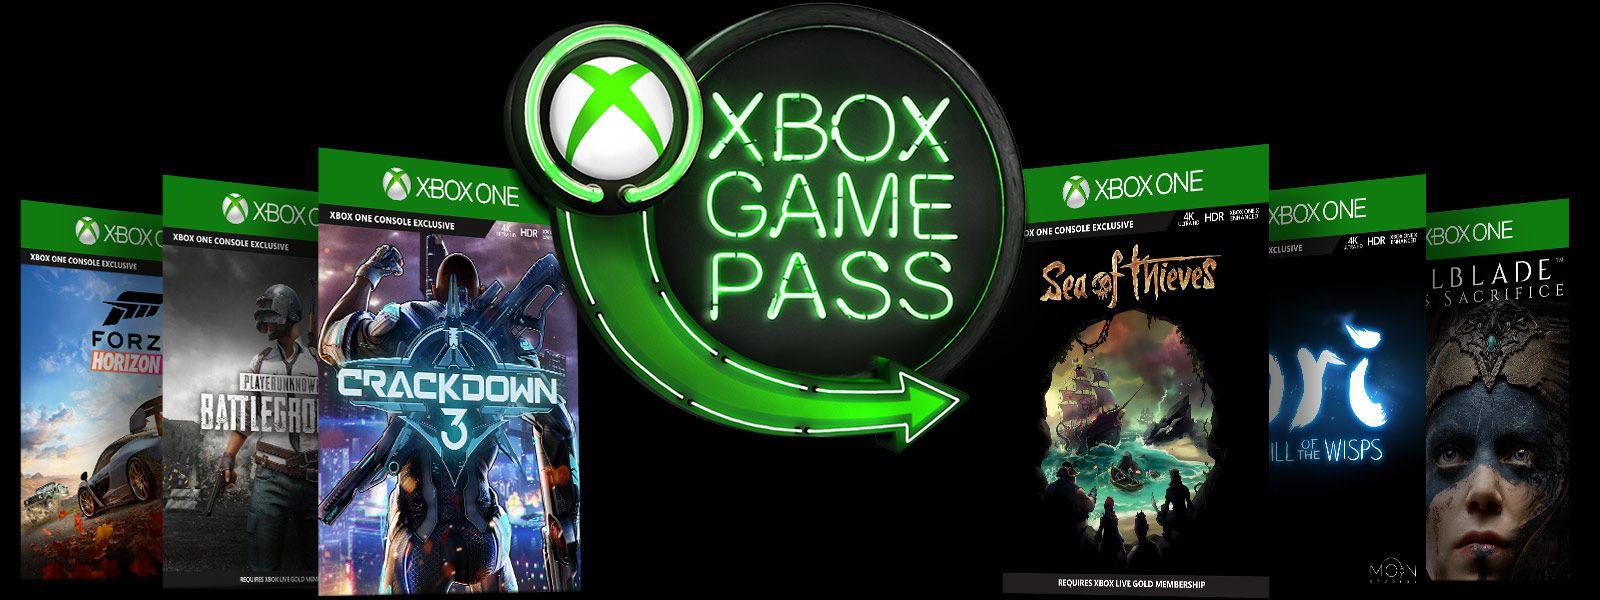 Crackdown 3 For Xbox One: Pre Install With Xbox Game Pass